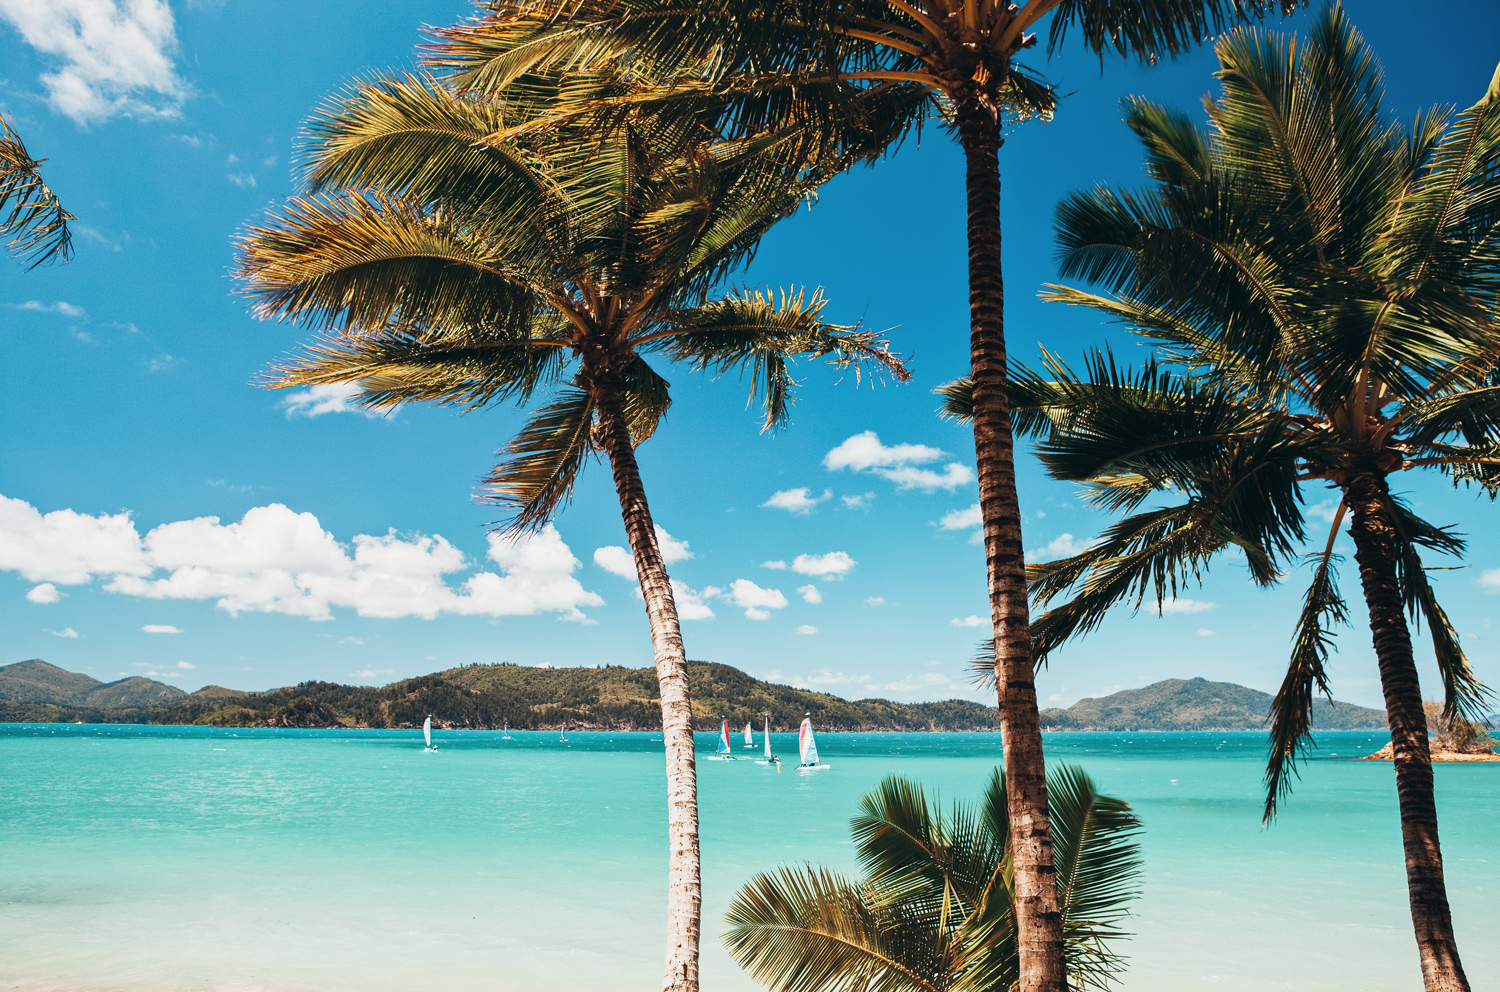 10 Things You Didn’t Know About Hamilton Island 